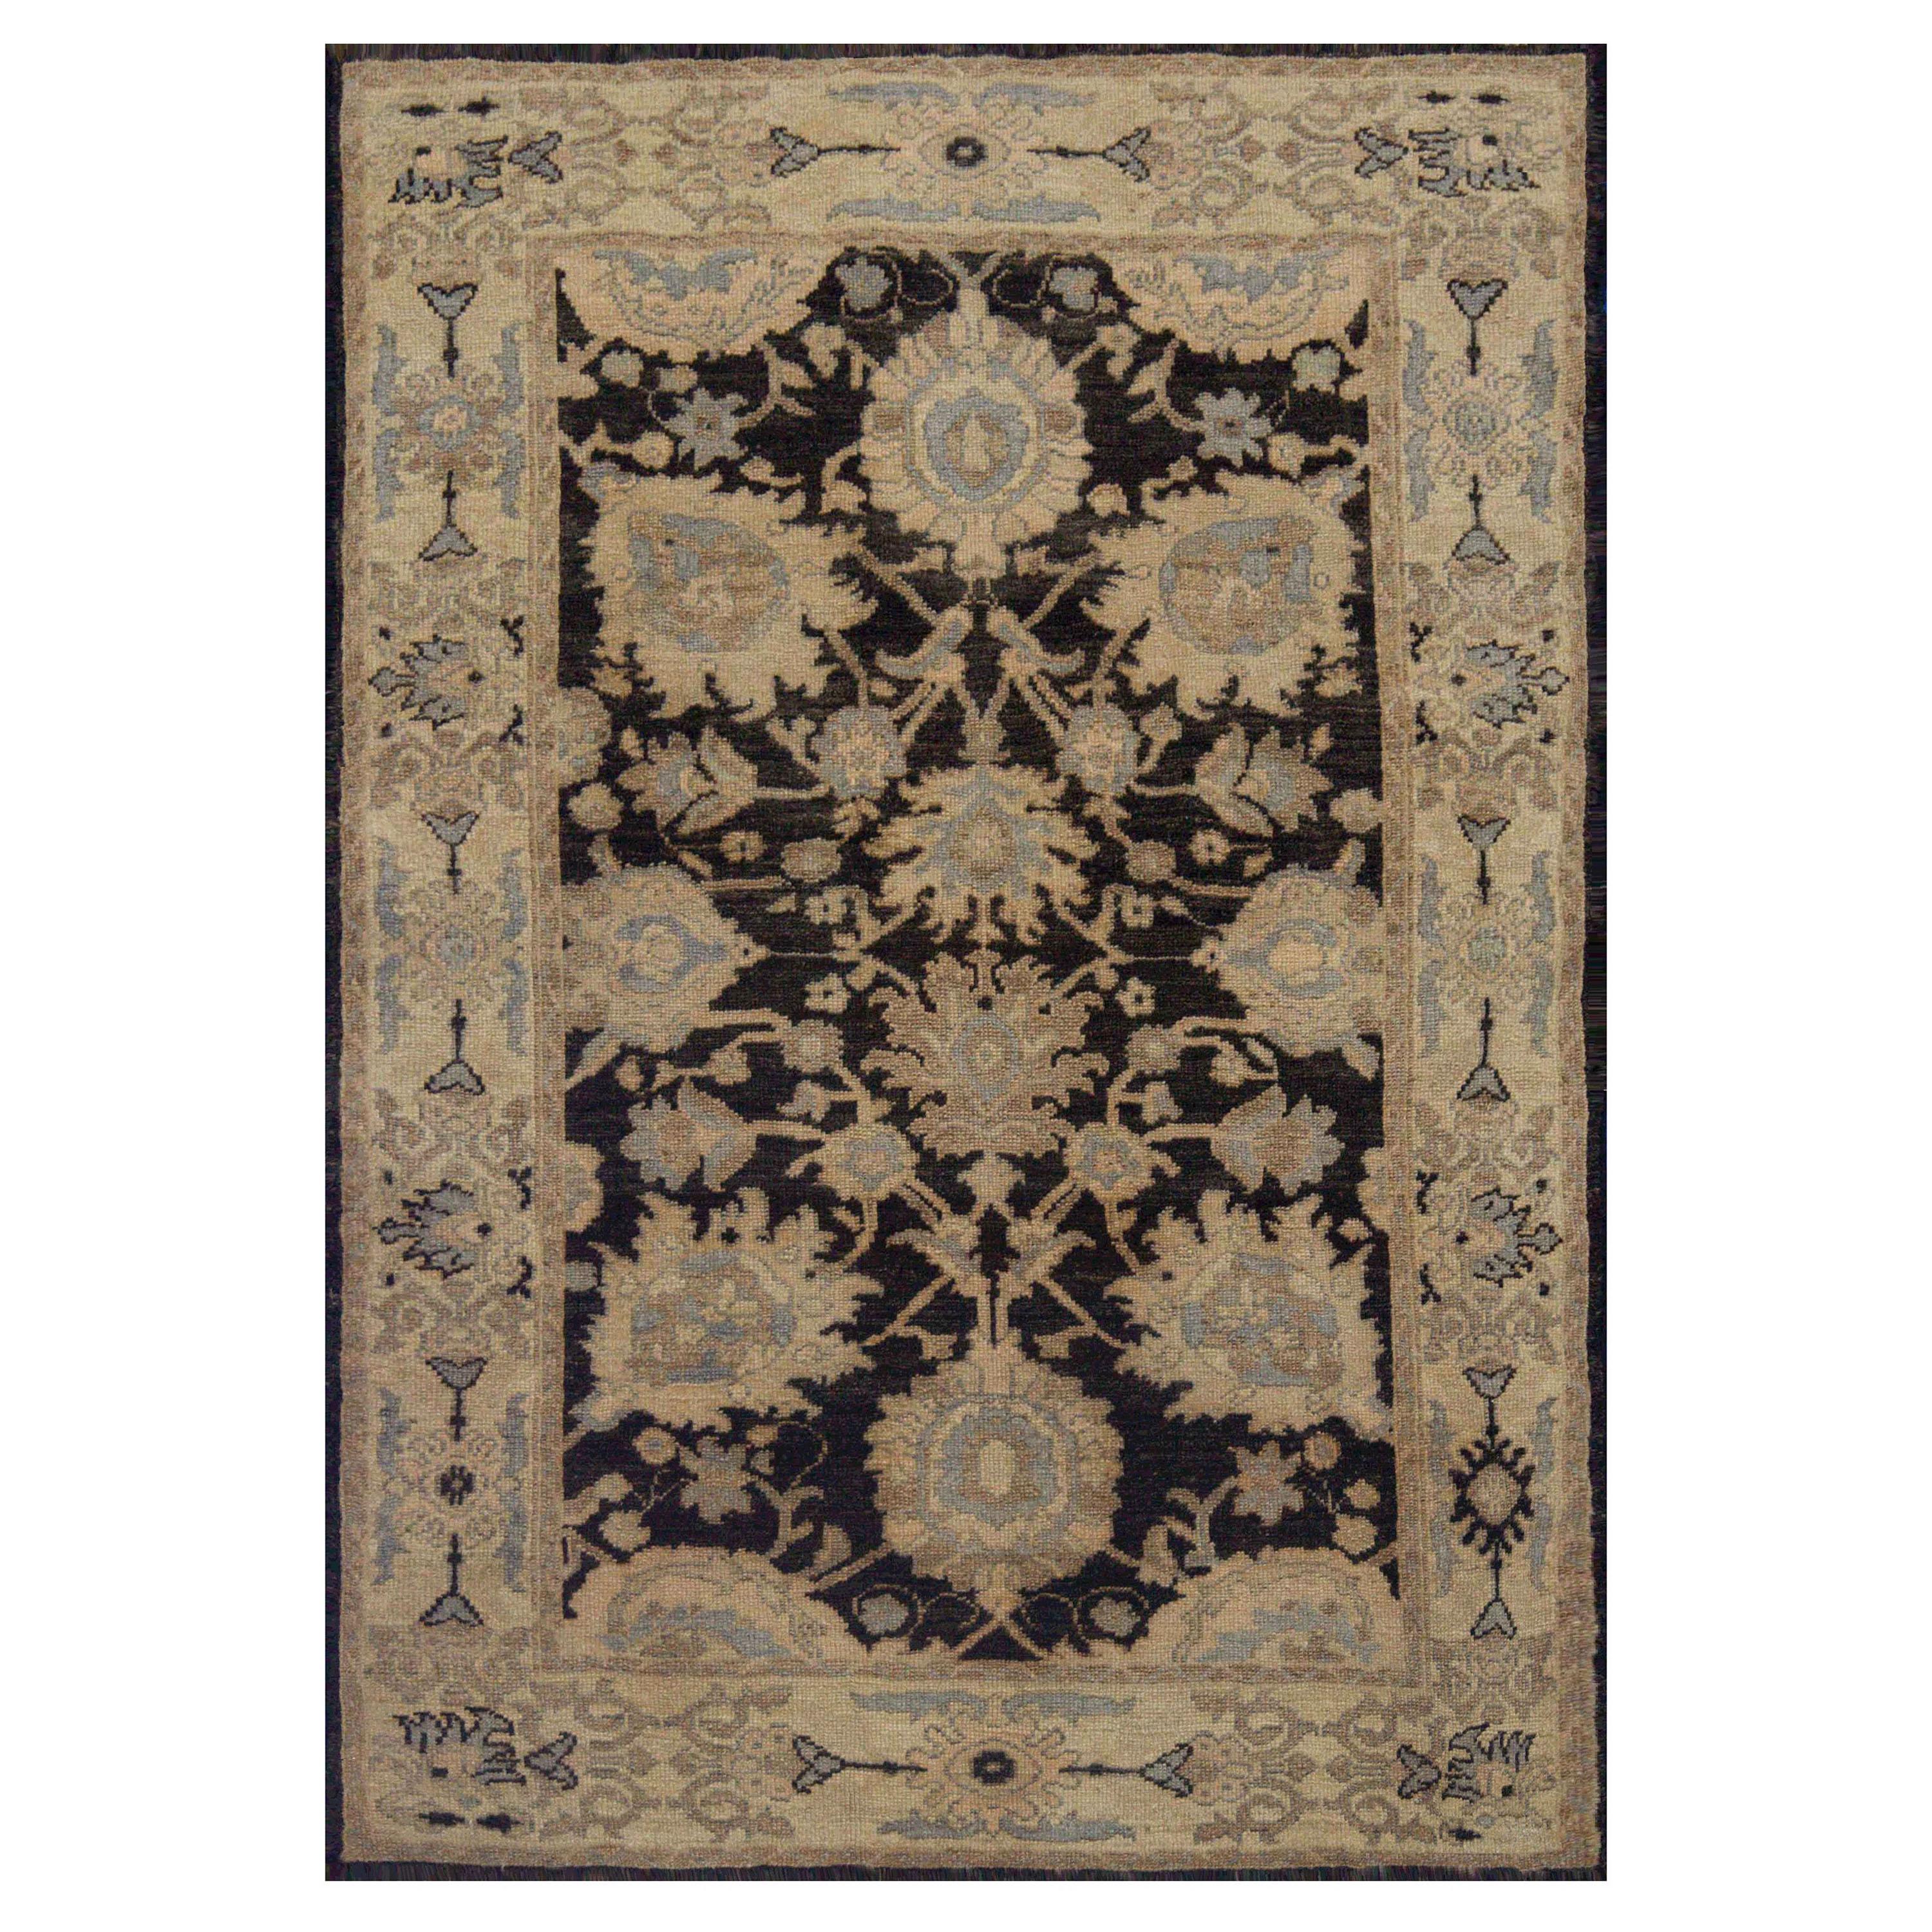 Contemporary Turkish Oushak Rug with Mixed Beige, Black and Gray Floral Details